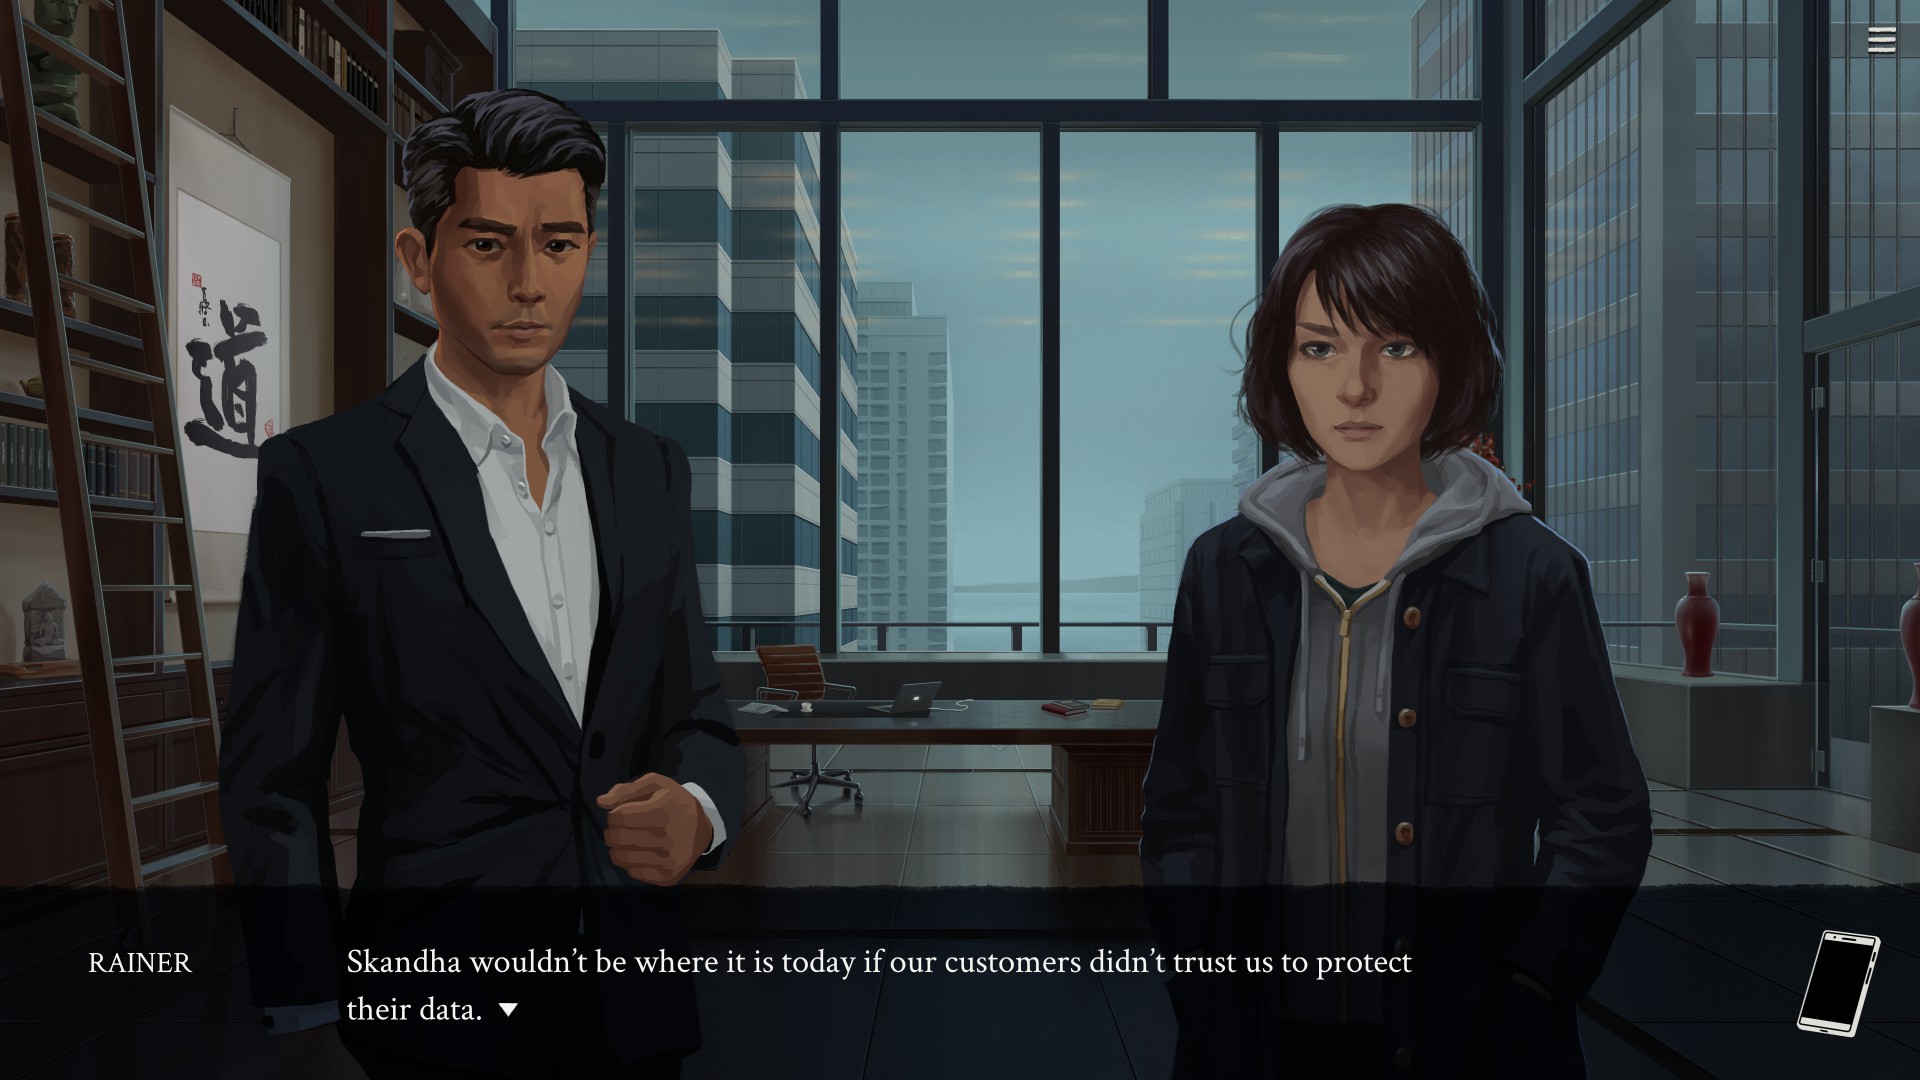 Visual novel Eliza explores the privacy risks of digital therapy